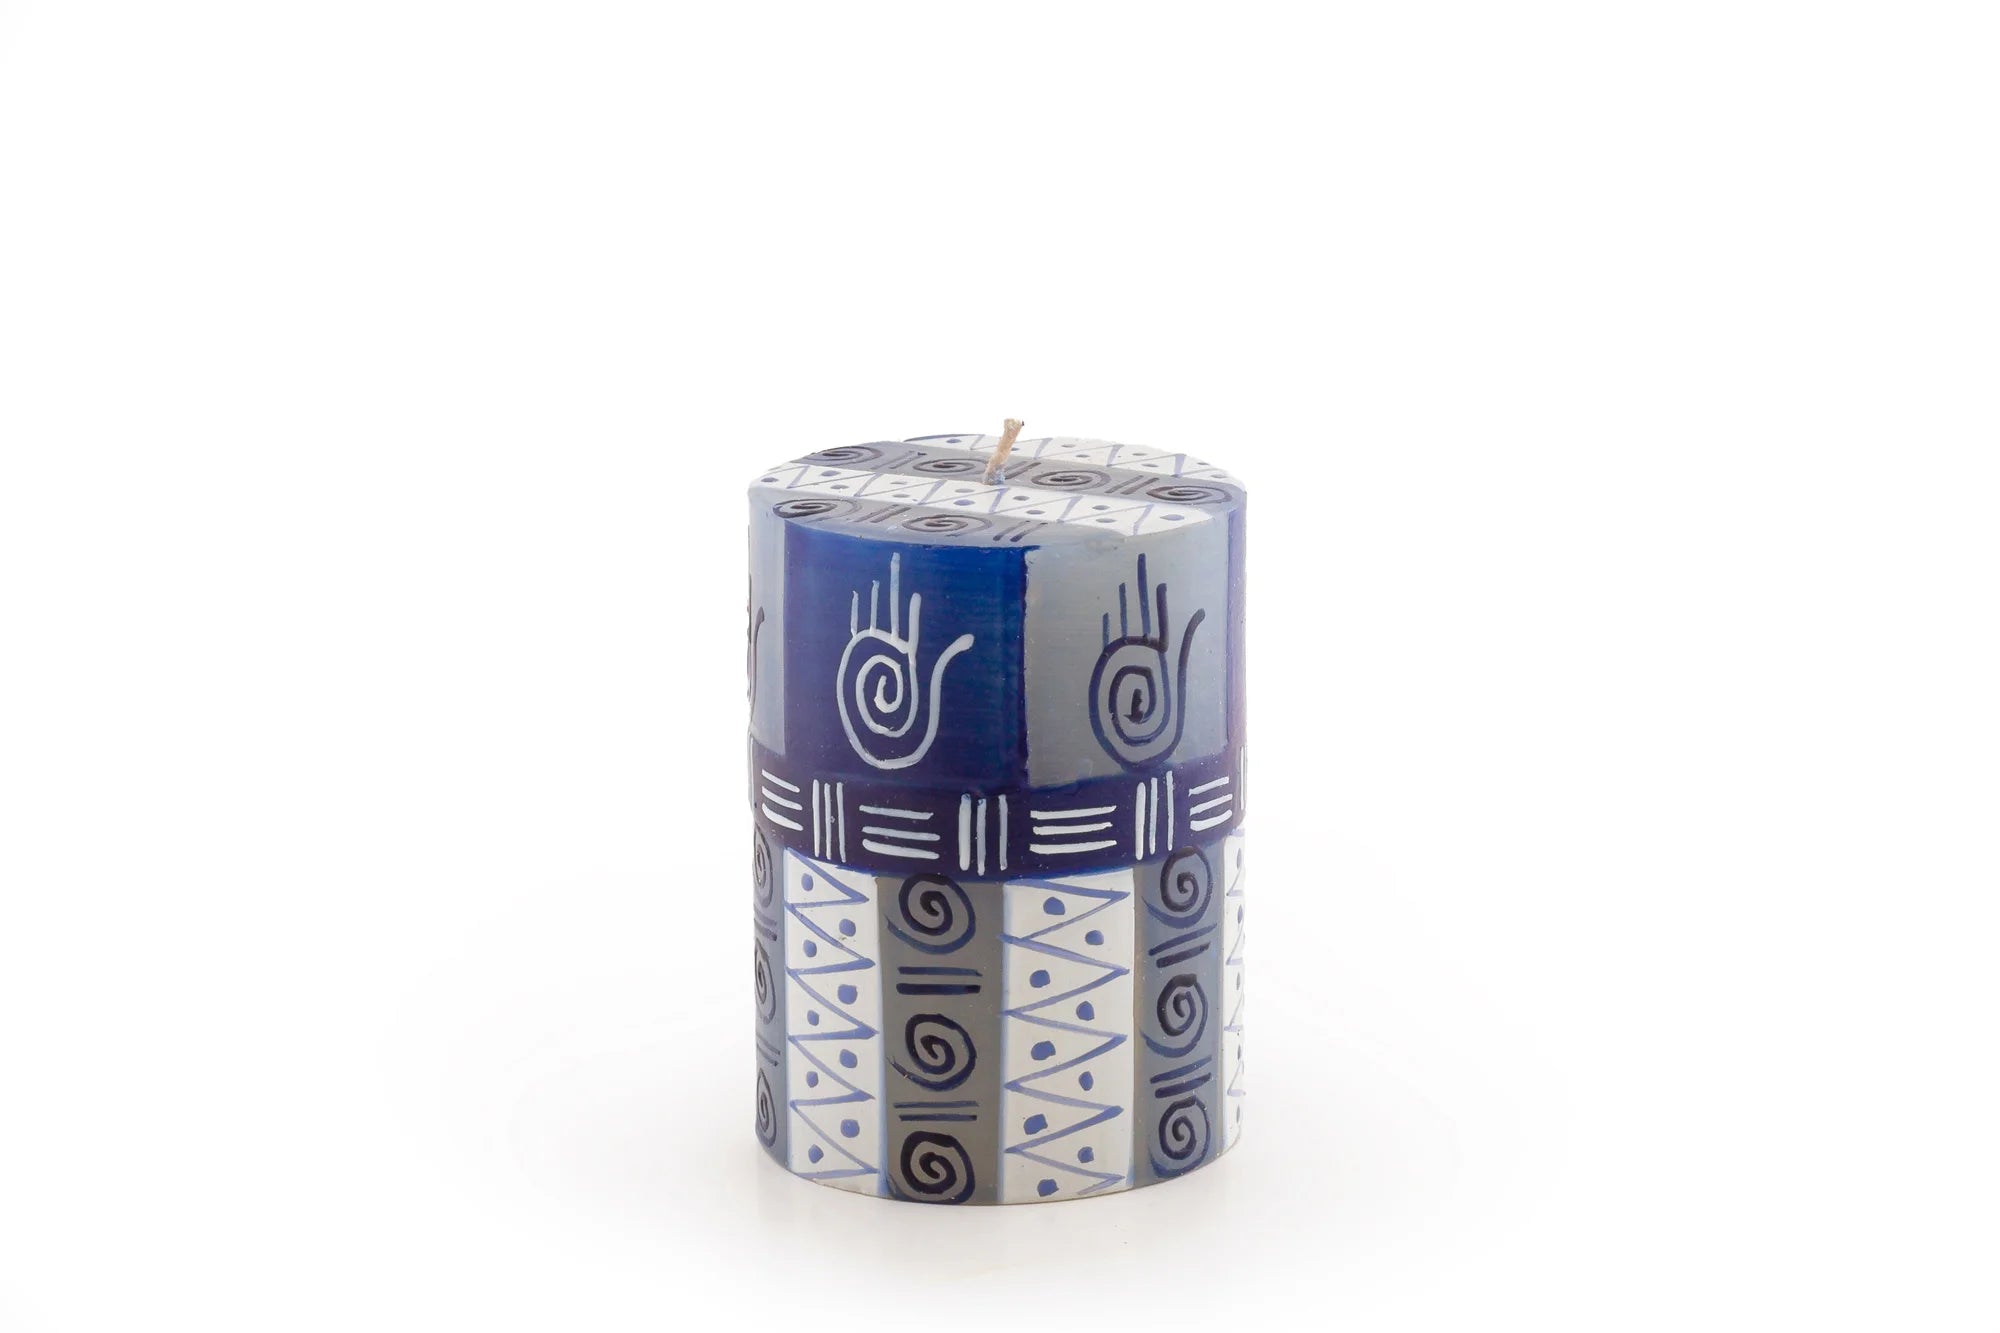 3" x 4" Hamsa pillar painted in Blue & White geometric designs with the Hamsa Hand included in the design.